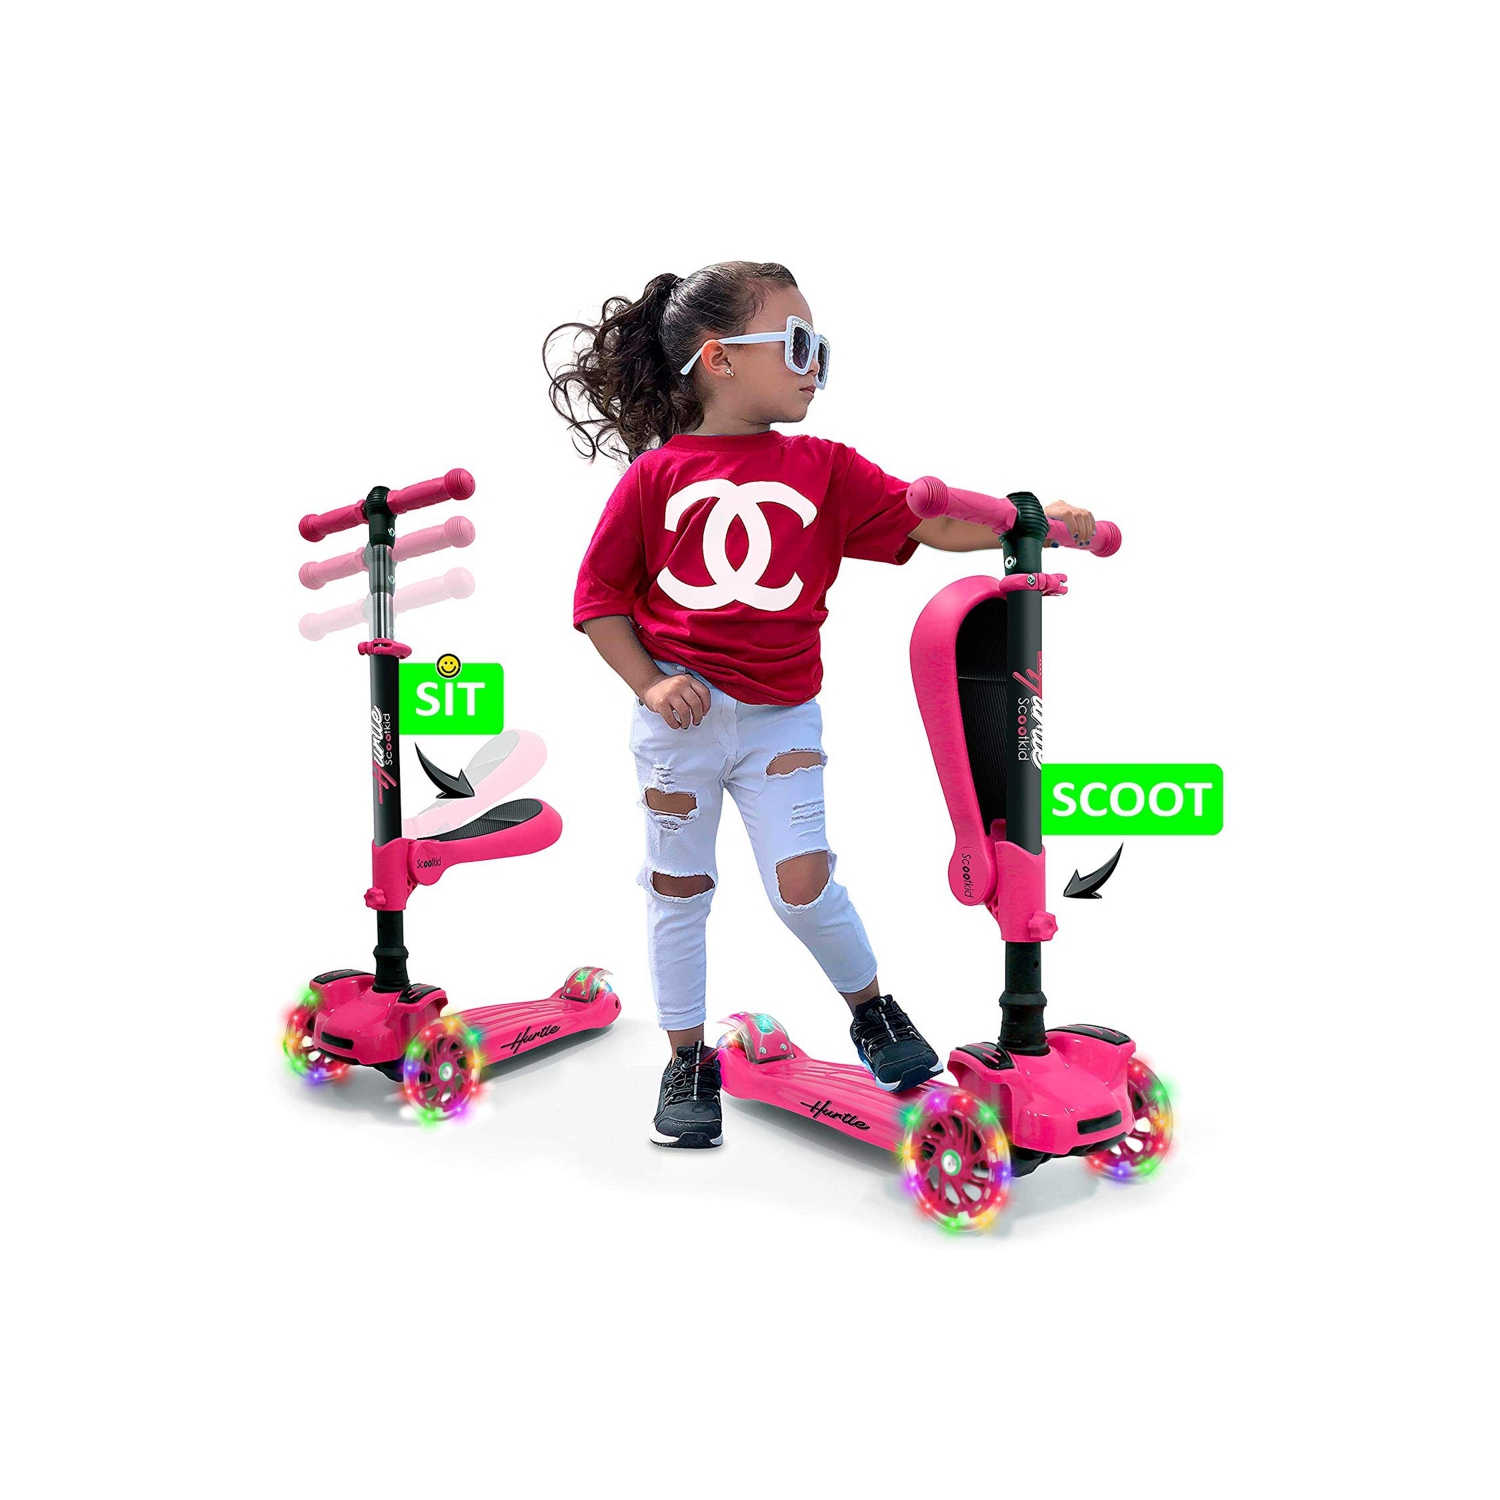 Hurtle 3 Wheeled Scooter for Kids - 2-in-1 Sit/Stand Child Toddlers Toy Kick Scooters W/Flip-Out Seat